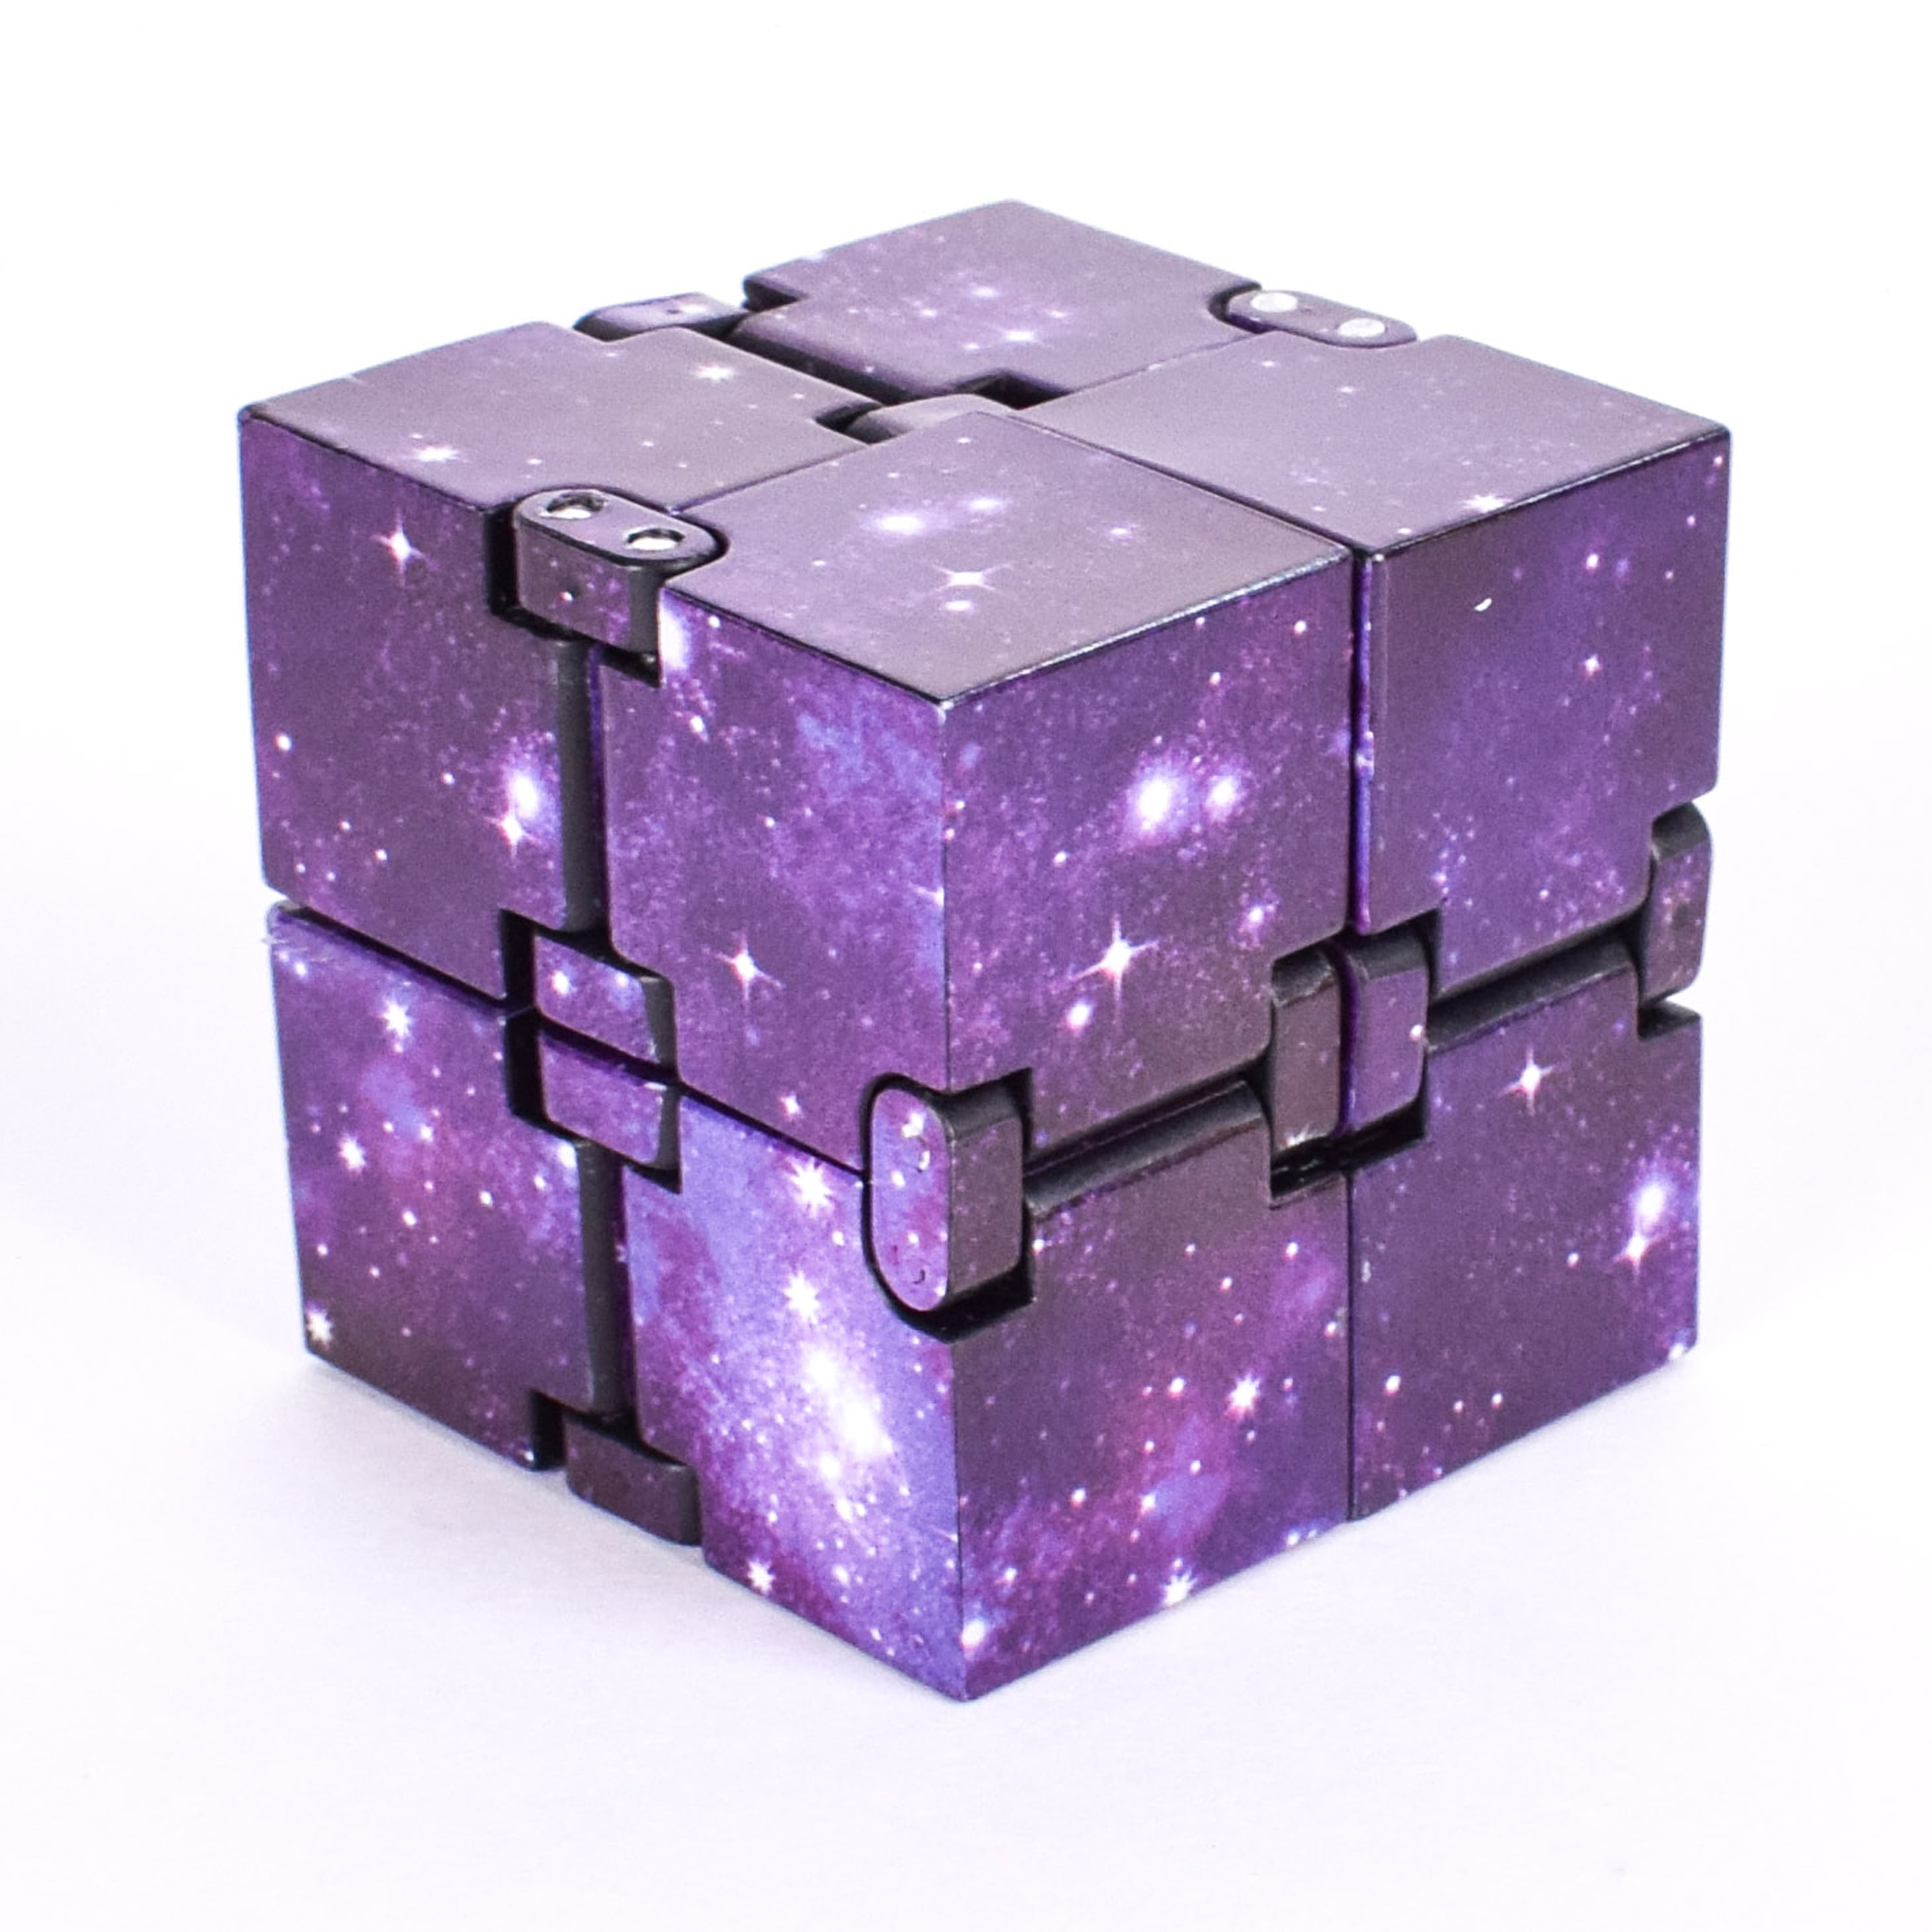 Giggle Zone Galaxy Infinity Cube, Fidget Toy Block for Stress Relief